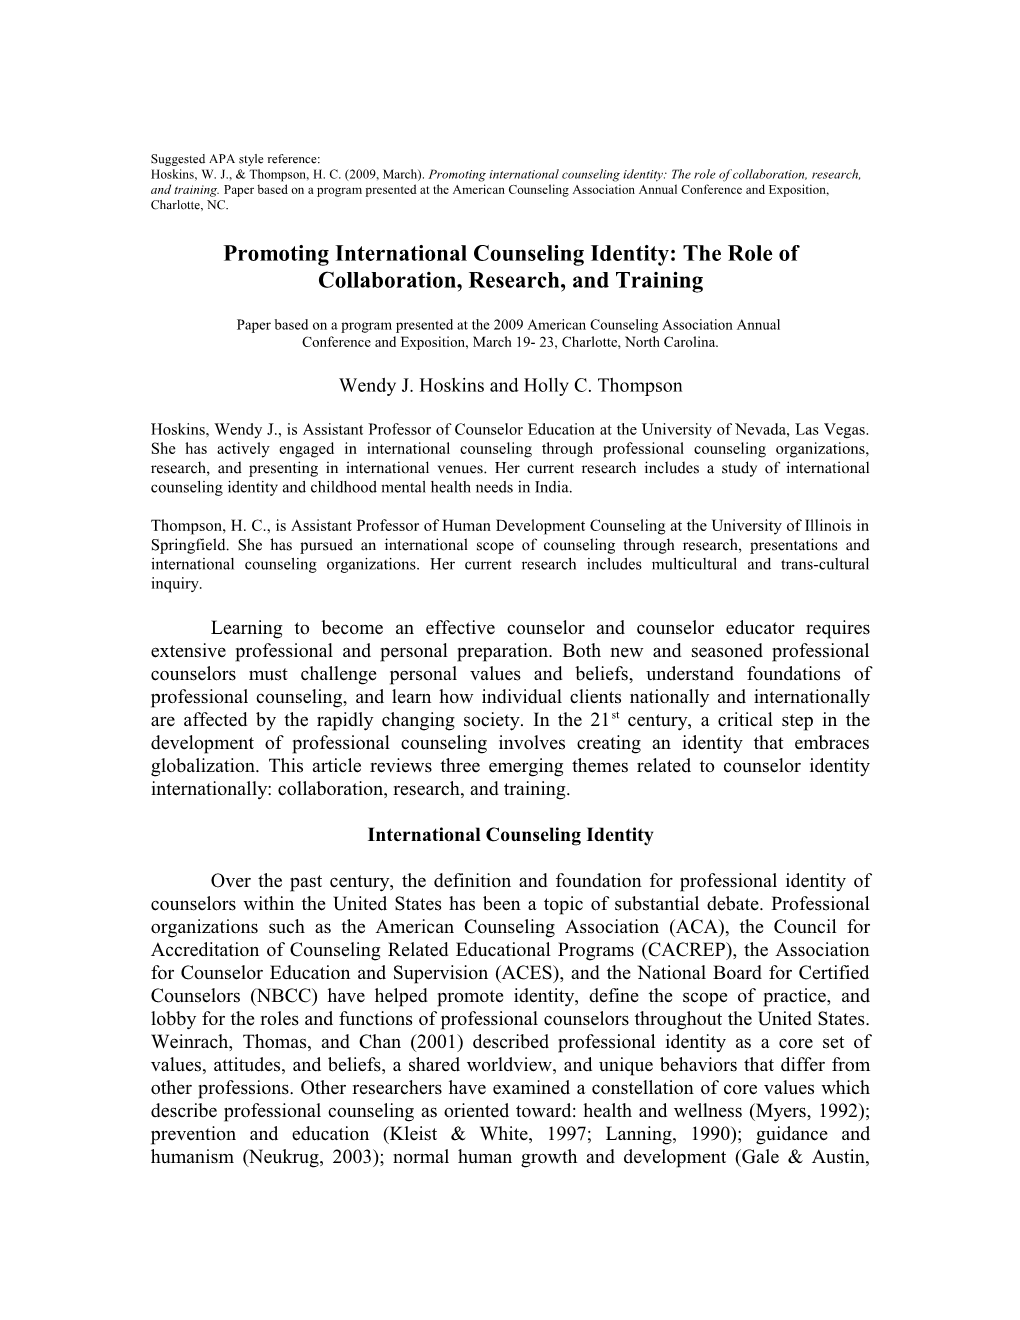 Promoting International Counseling Identity: the Role of Collaboration, Research, and Training